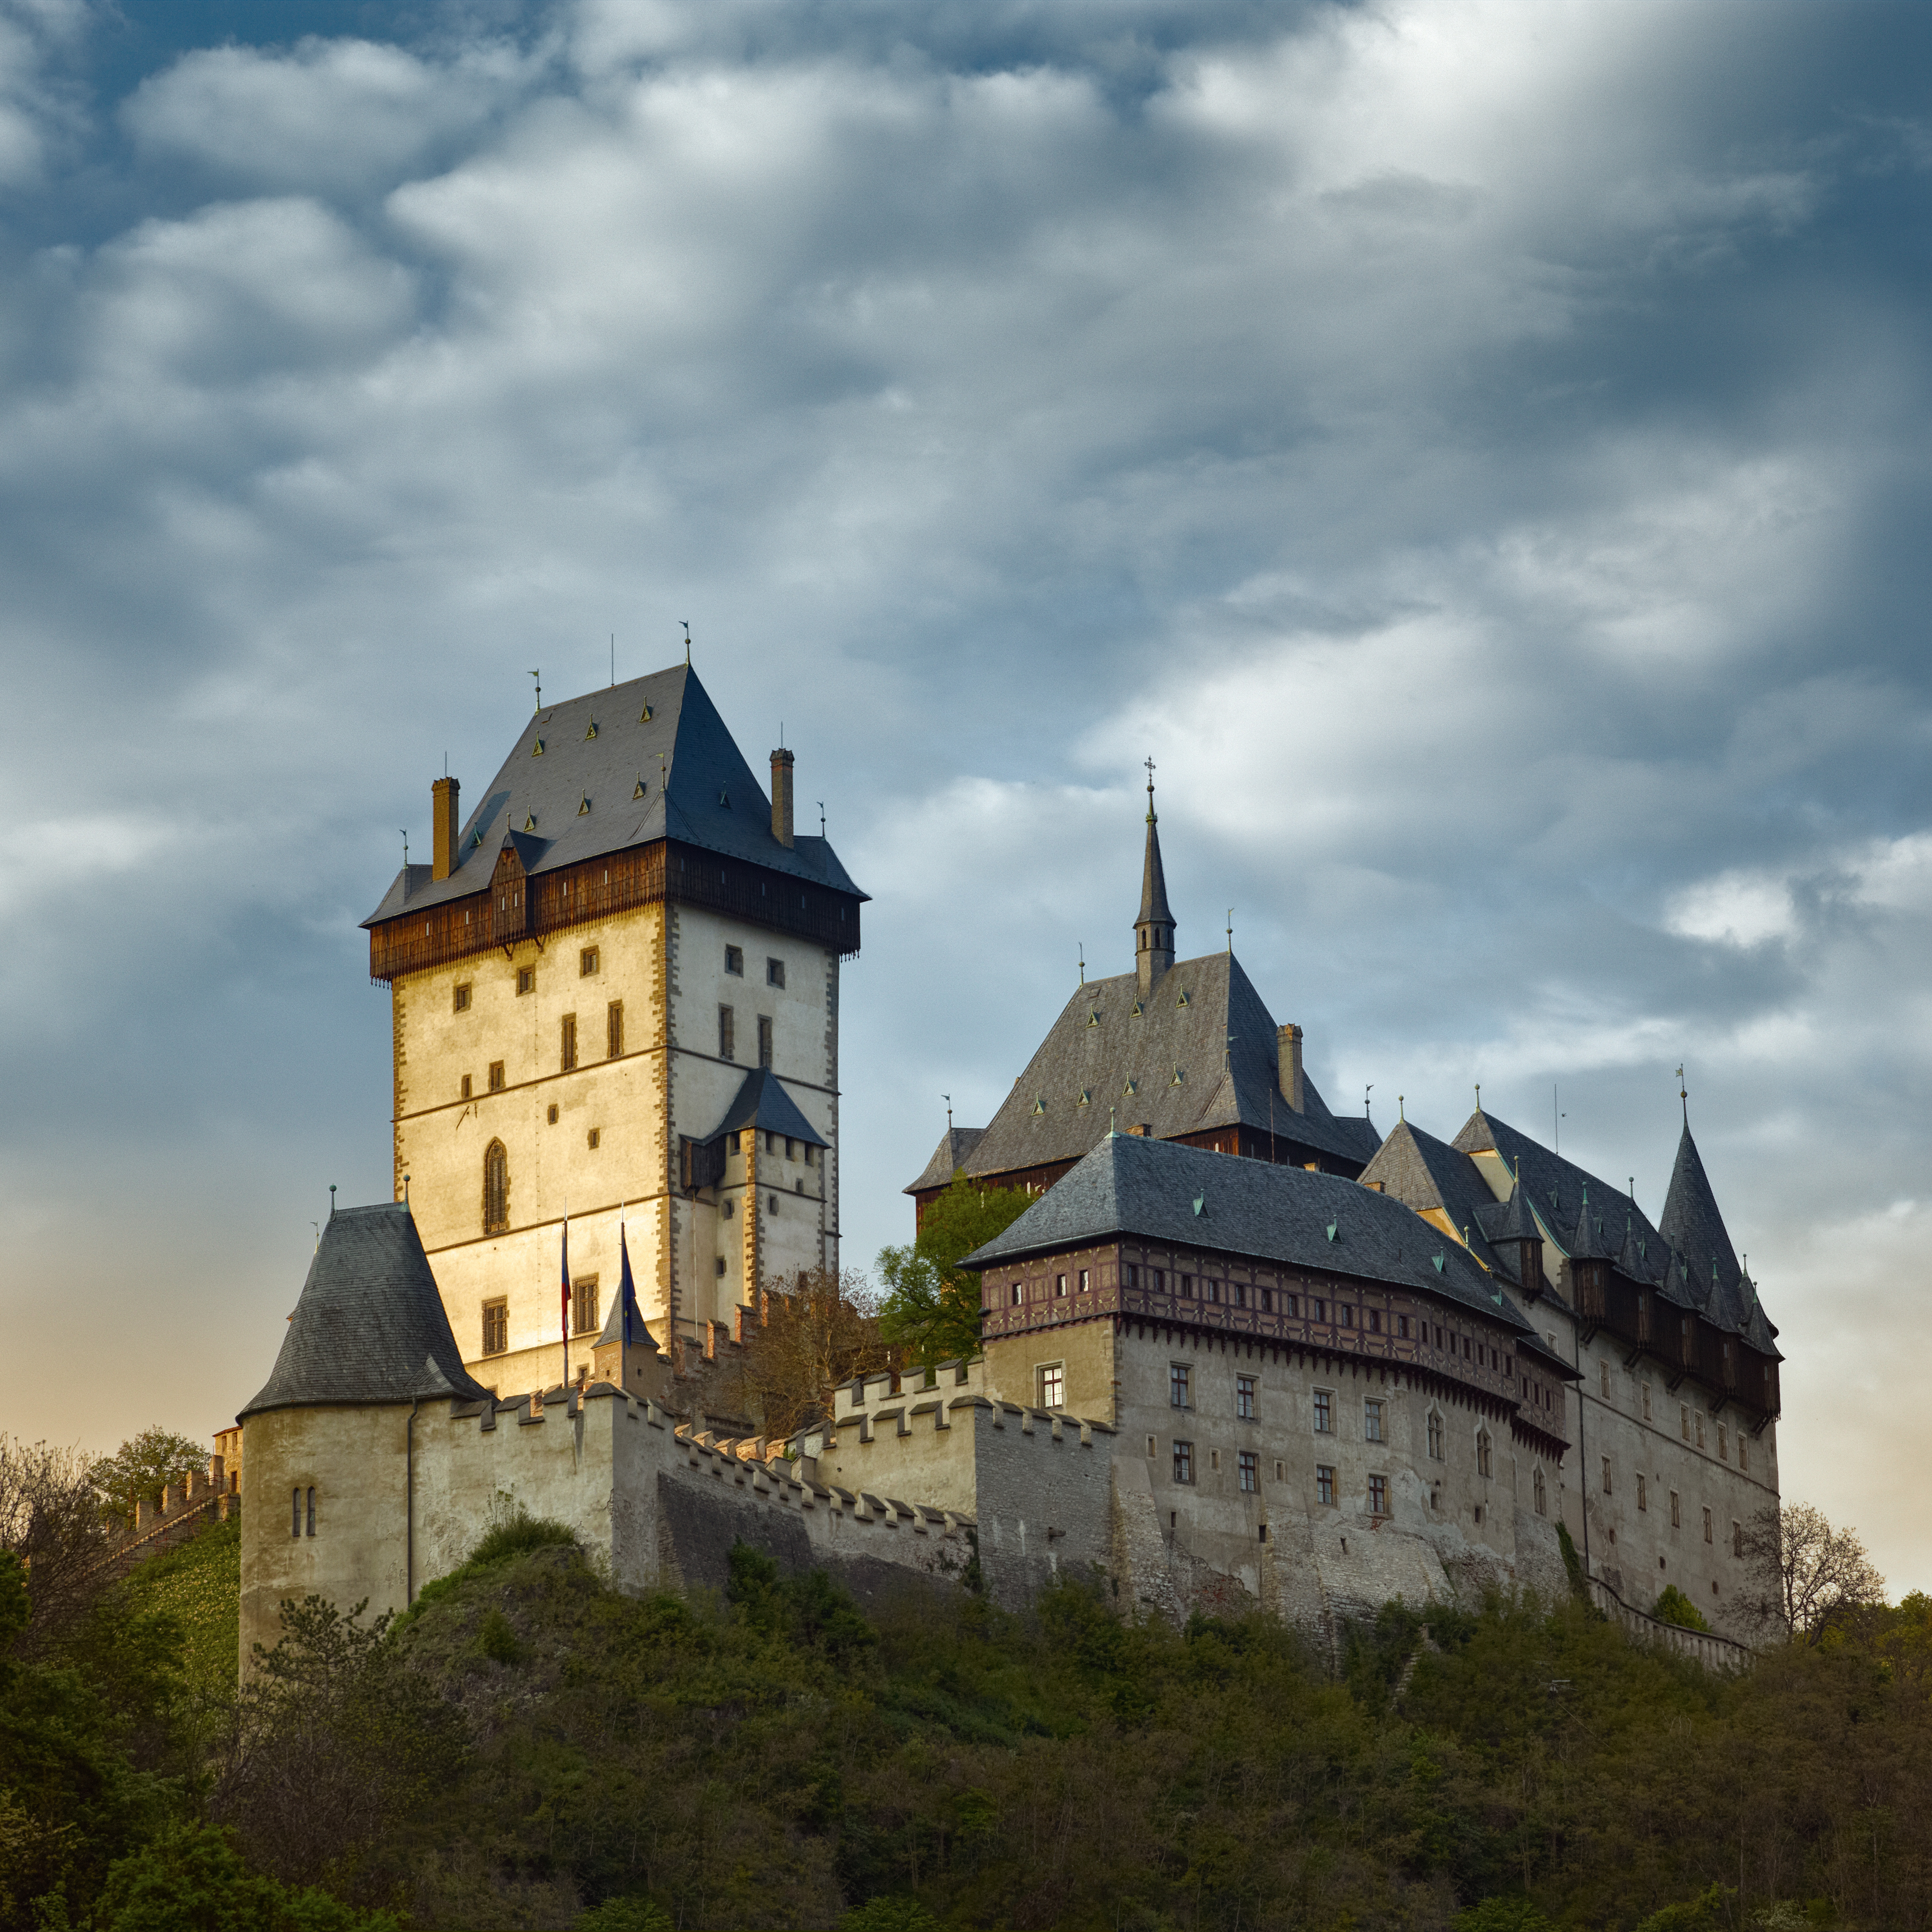 Karlstejn Castle is less than an hour away from Prague